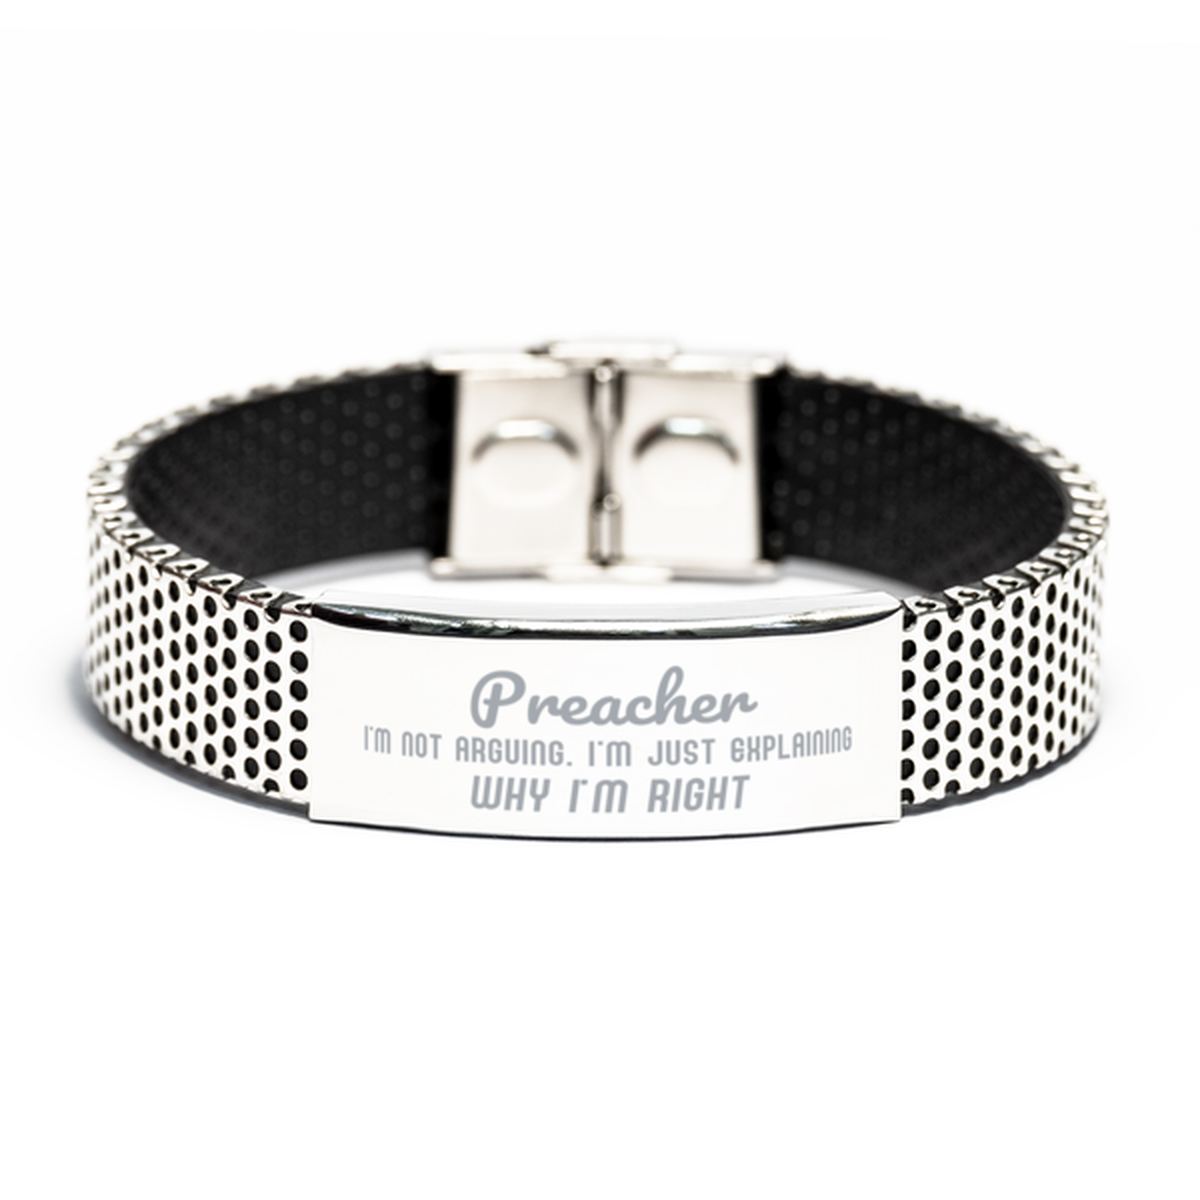 Preacher I'm not Arguing. I'm Just Explaining Why I'm RIGHT Stainless Steel Bracelet, Funny Saying Quote Preacher Gifts For Preacher Graduation Birthday Christmas Gifts for Men Women Coworker